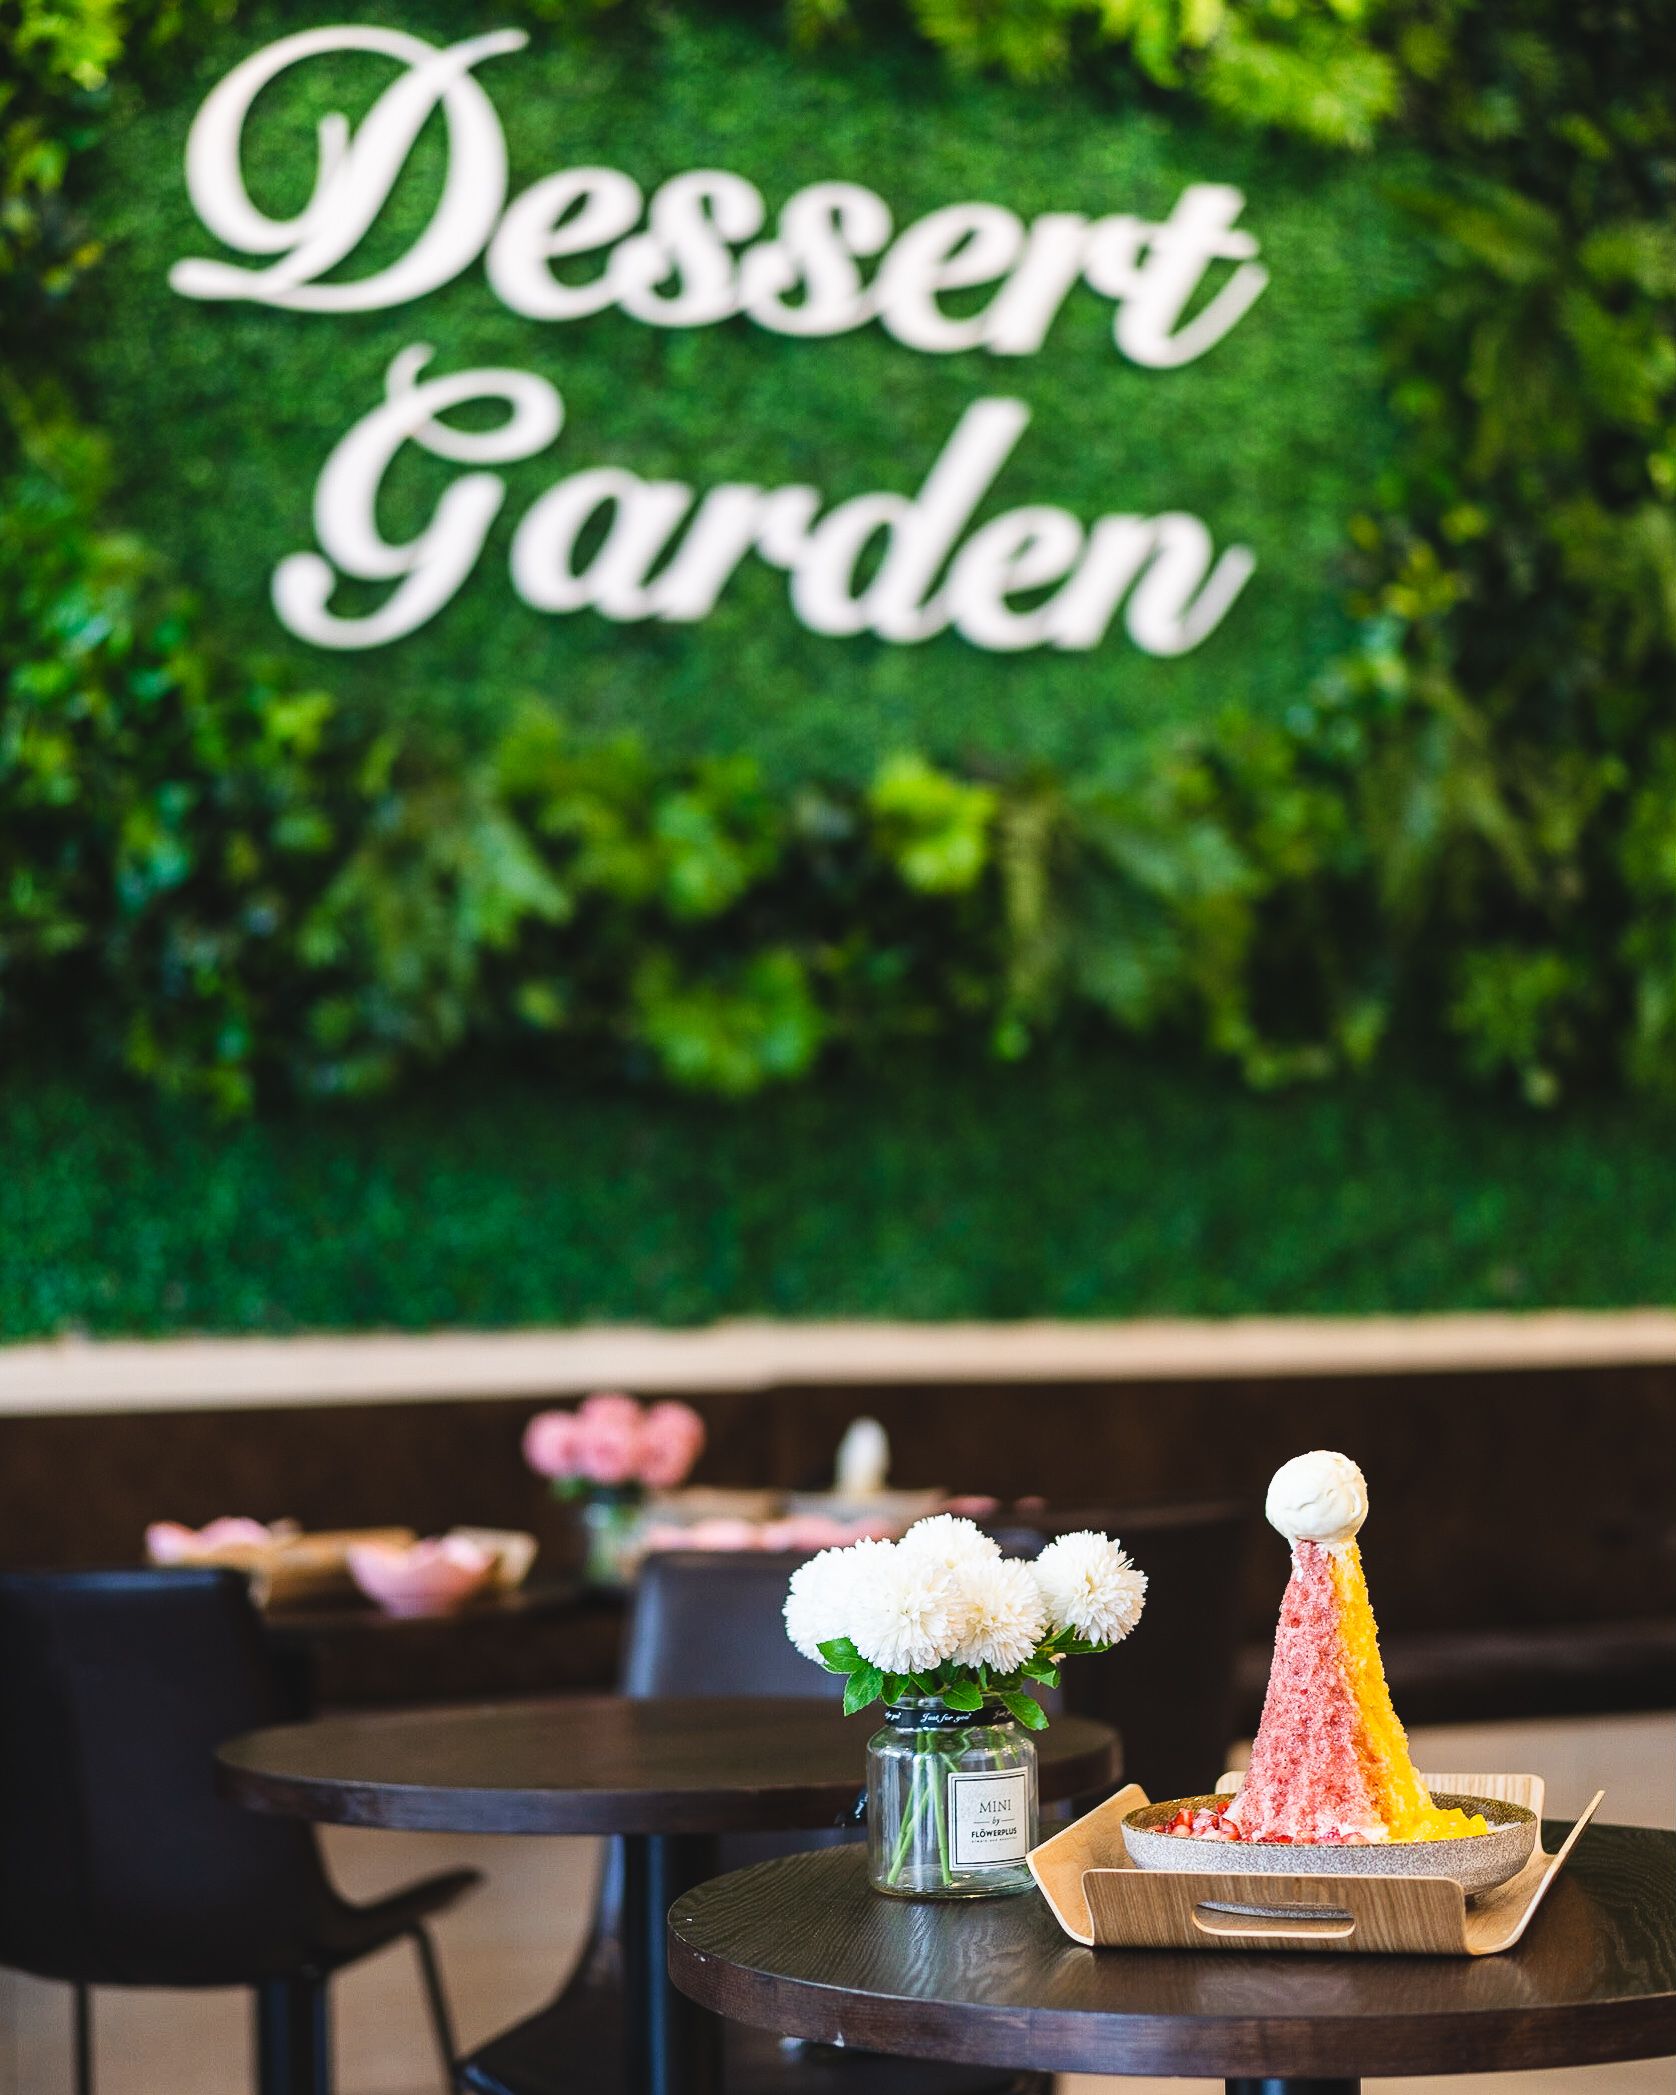 Shaved ice dessert placed on a table with the Dessert Garden sign in the background